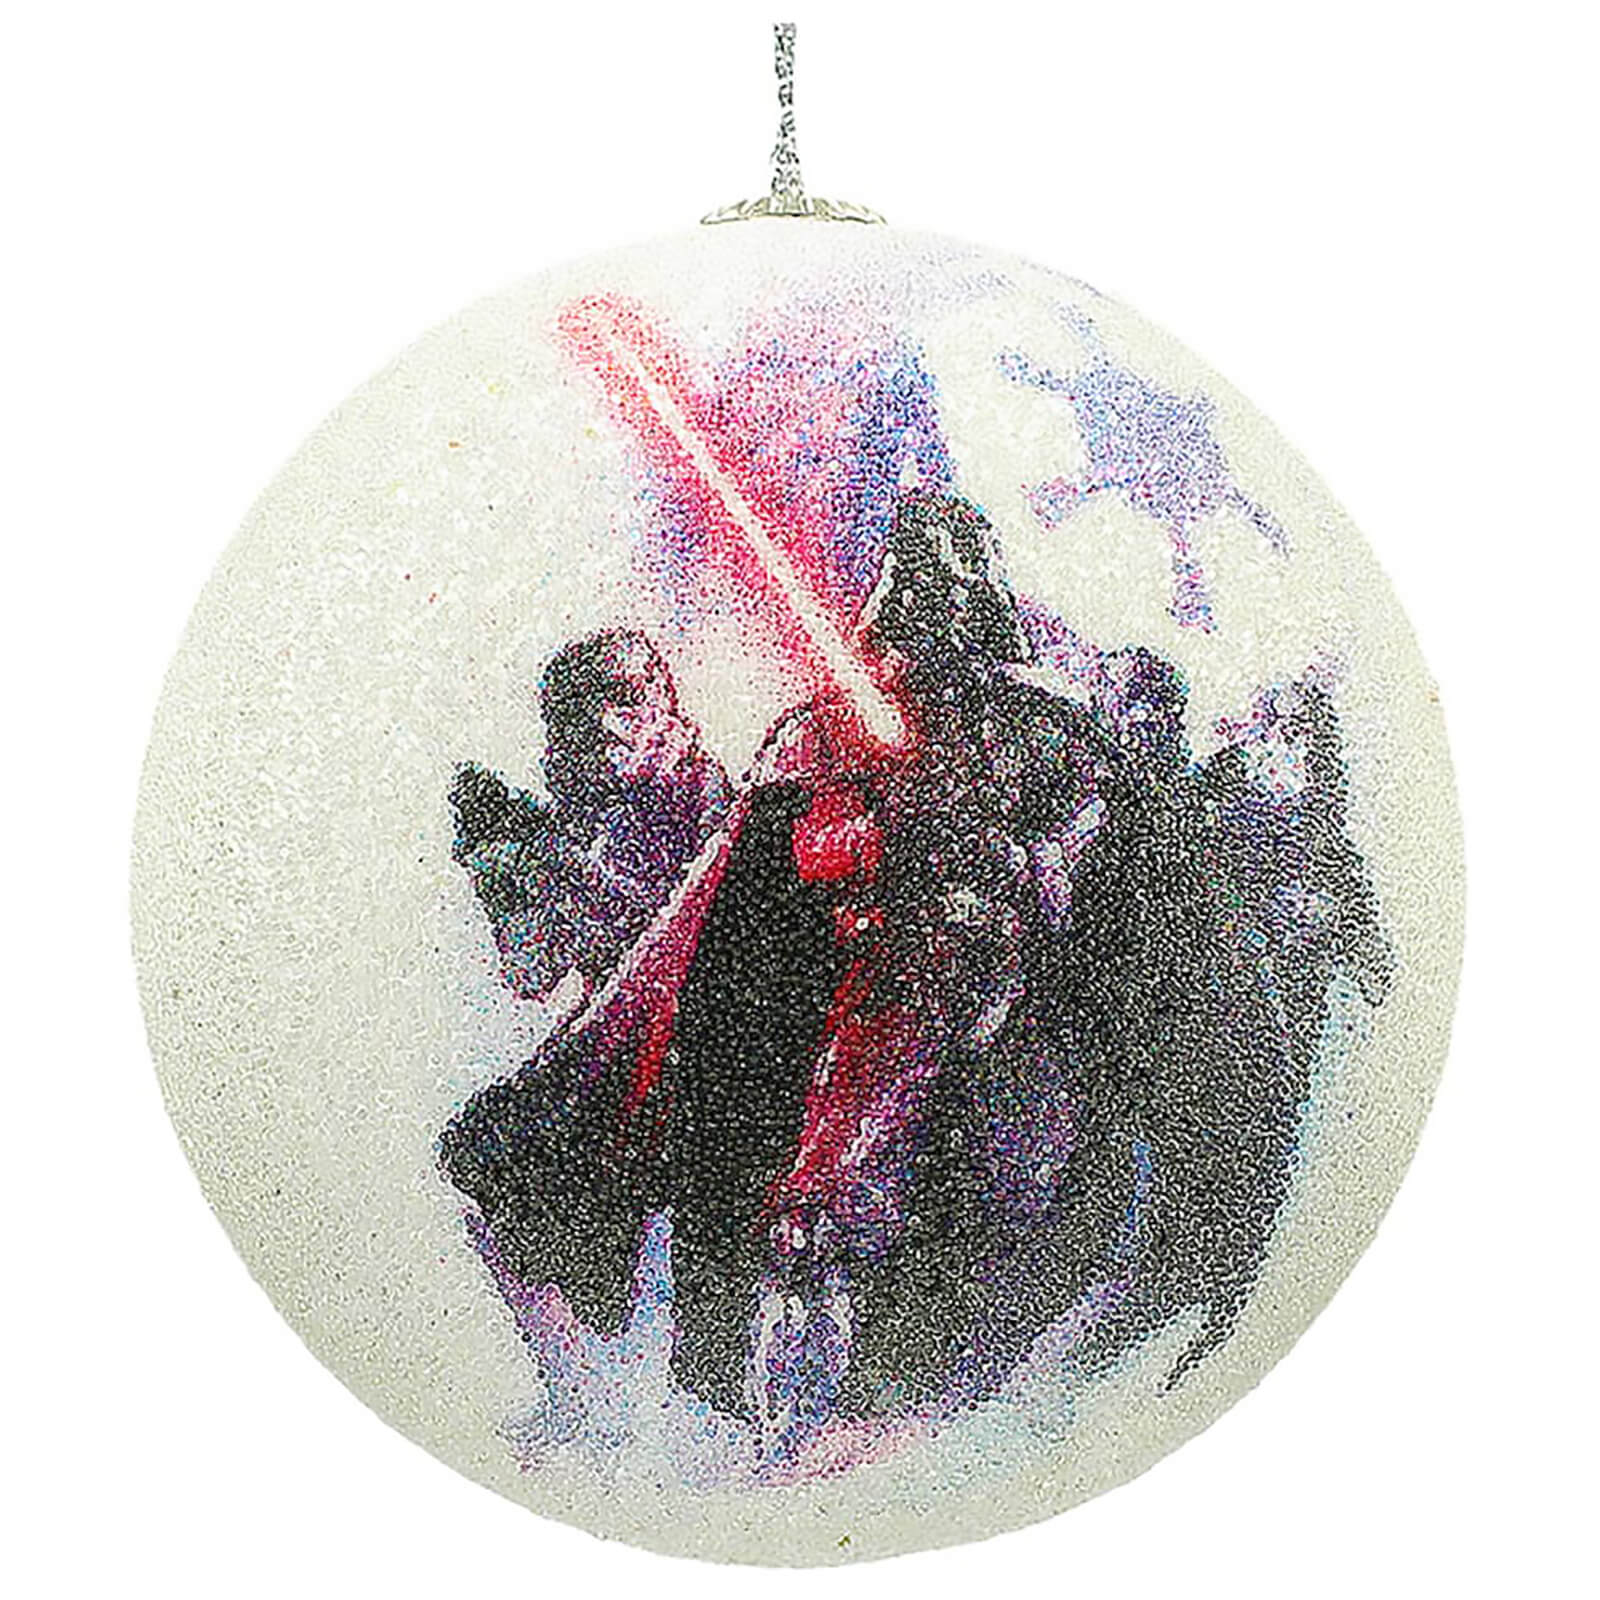 Star Wars Christmas Bauble - Vader and Stormtroopers